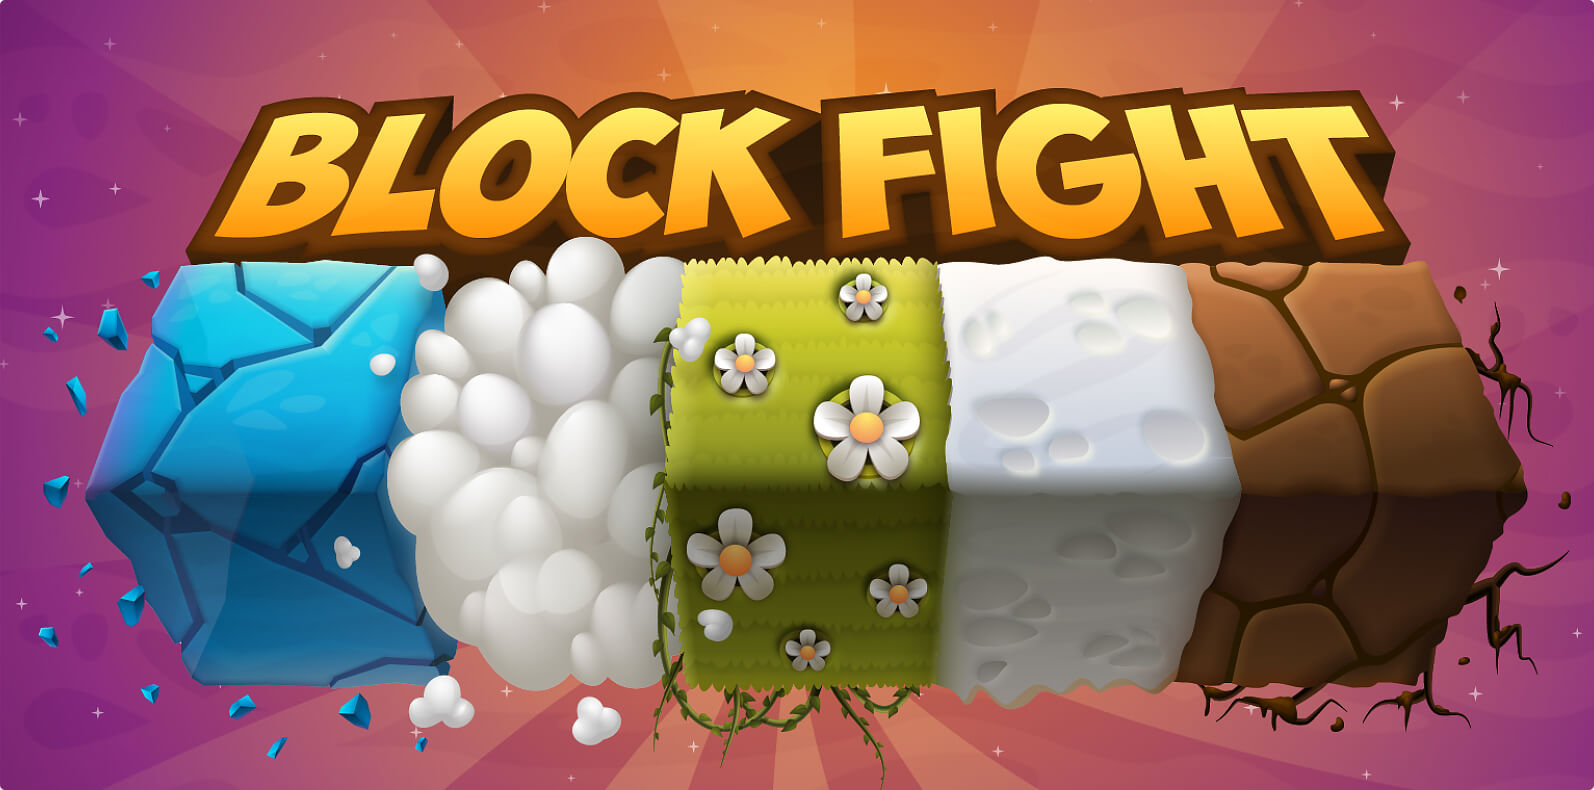 Block Fight - Tetris mobile game designed and developed by Fgfactory